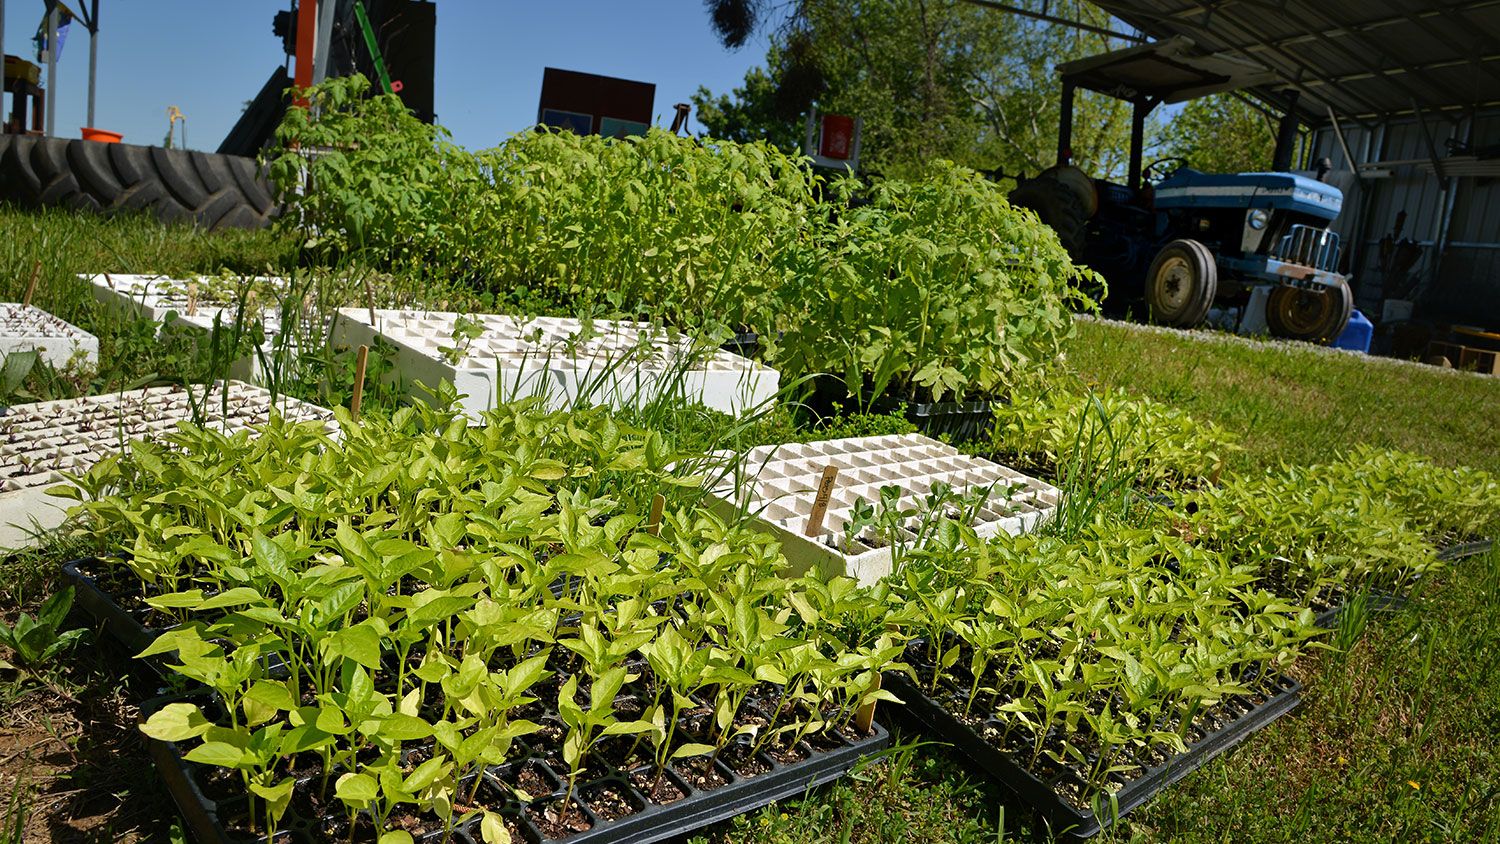 A large number of pepper and tomato gardening trays